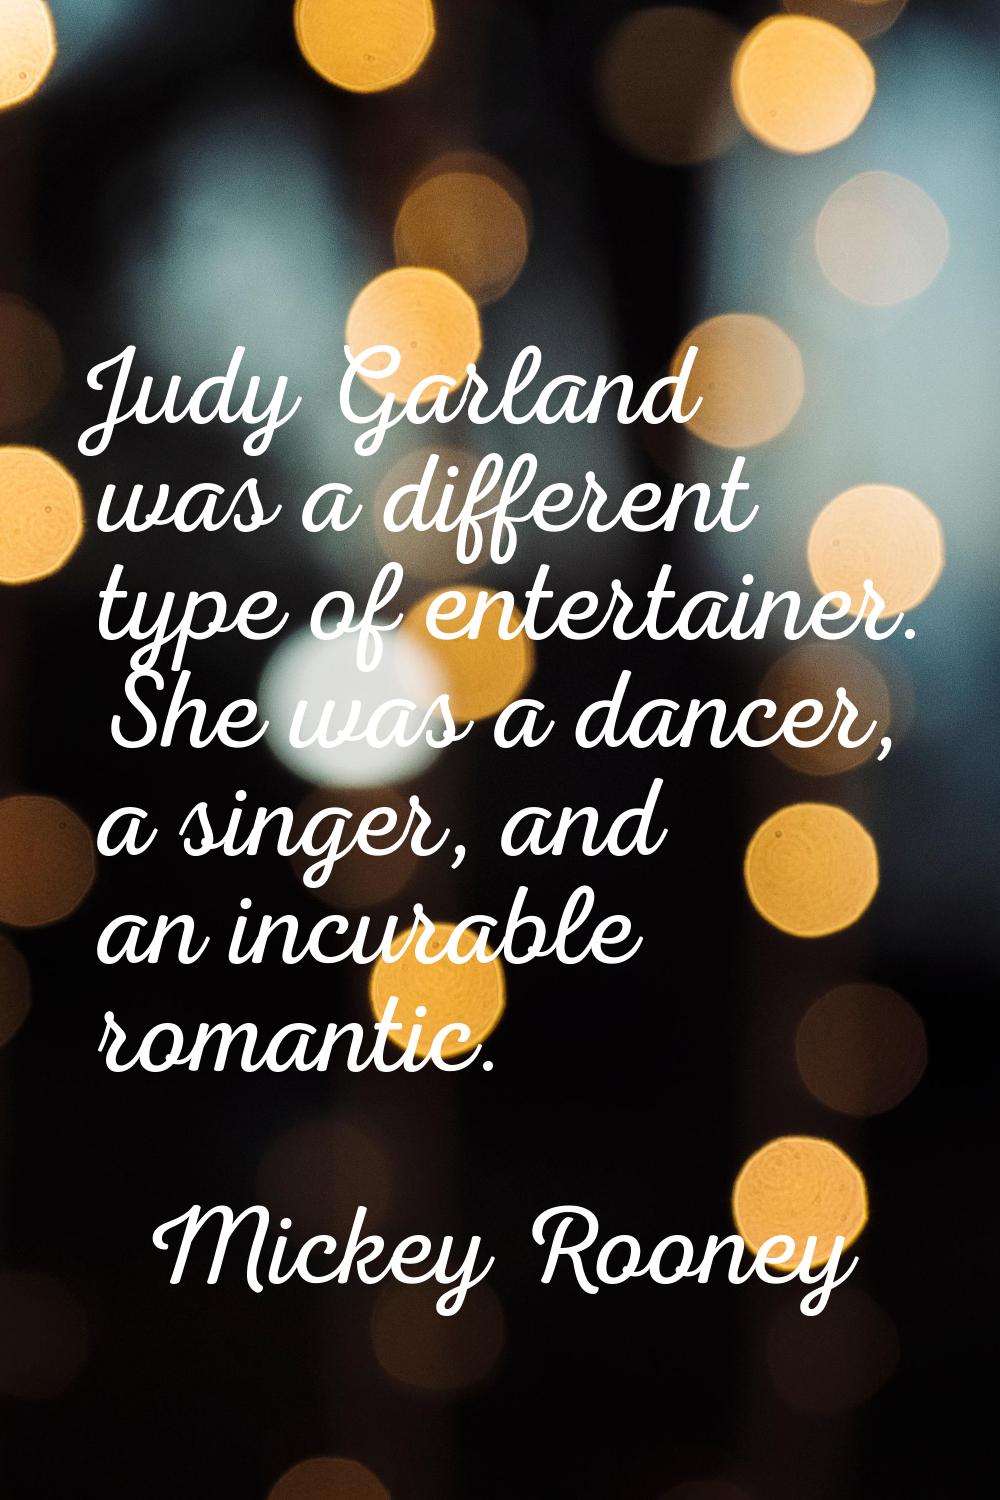 Judy Garland was a different type of entertainer. She was a dancer, a singer, and an incurable roma